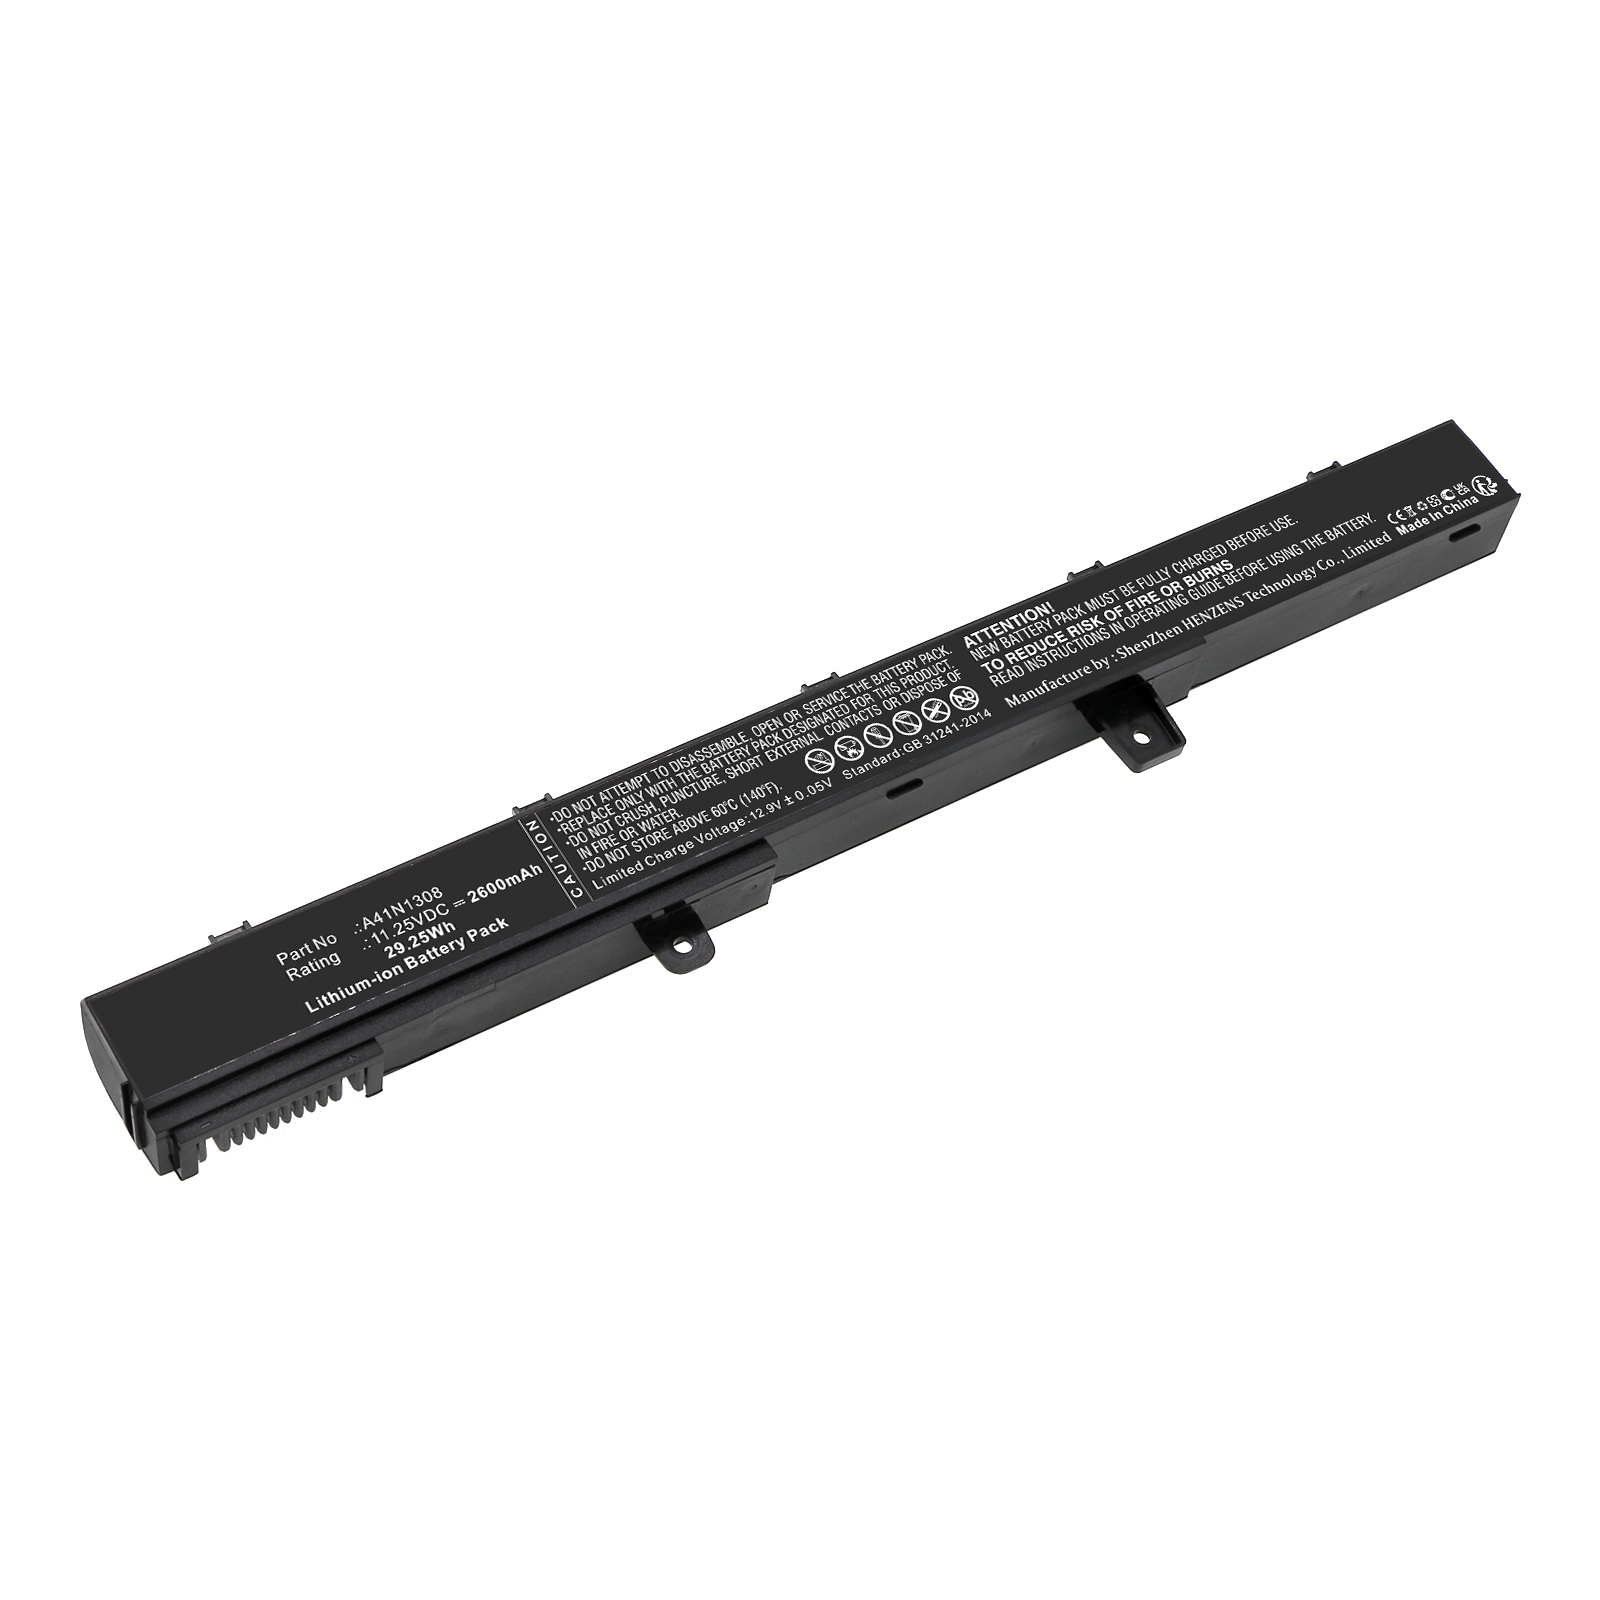 Synergy Digital Laptop Battery, Compatible with Asus A31LJ91 Laptop Battery (Li-ion, 11.25V, 2600mAh)